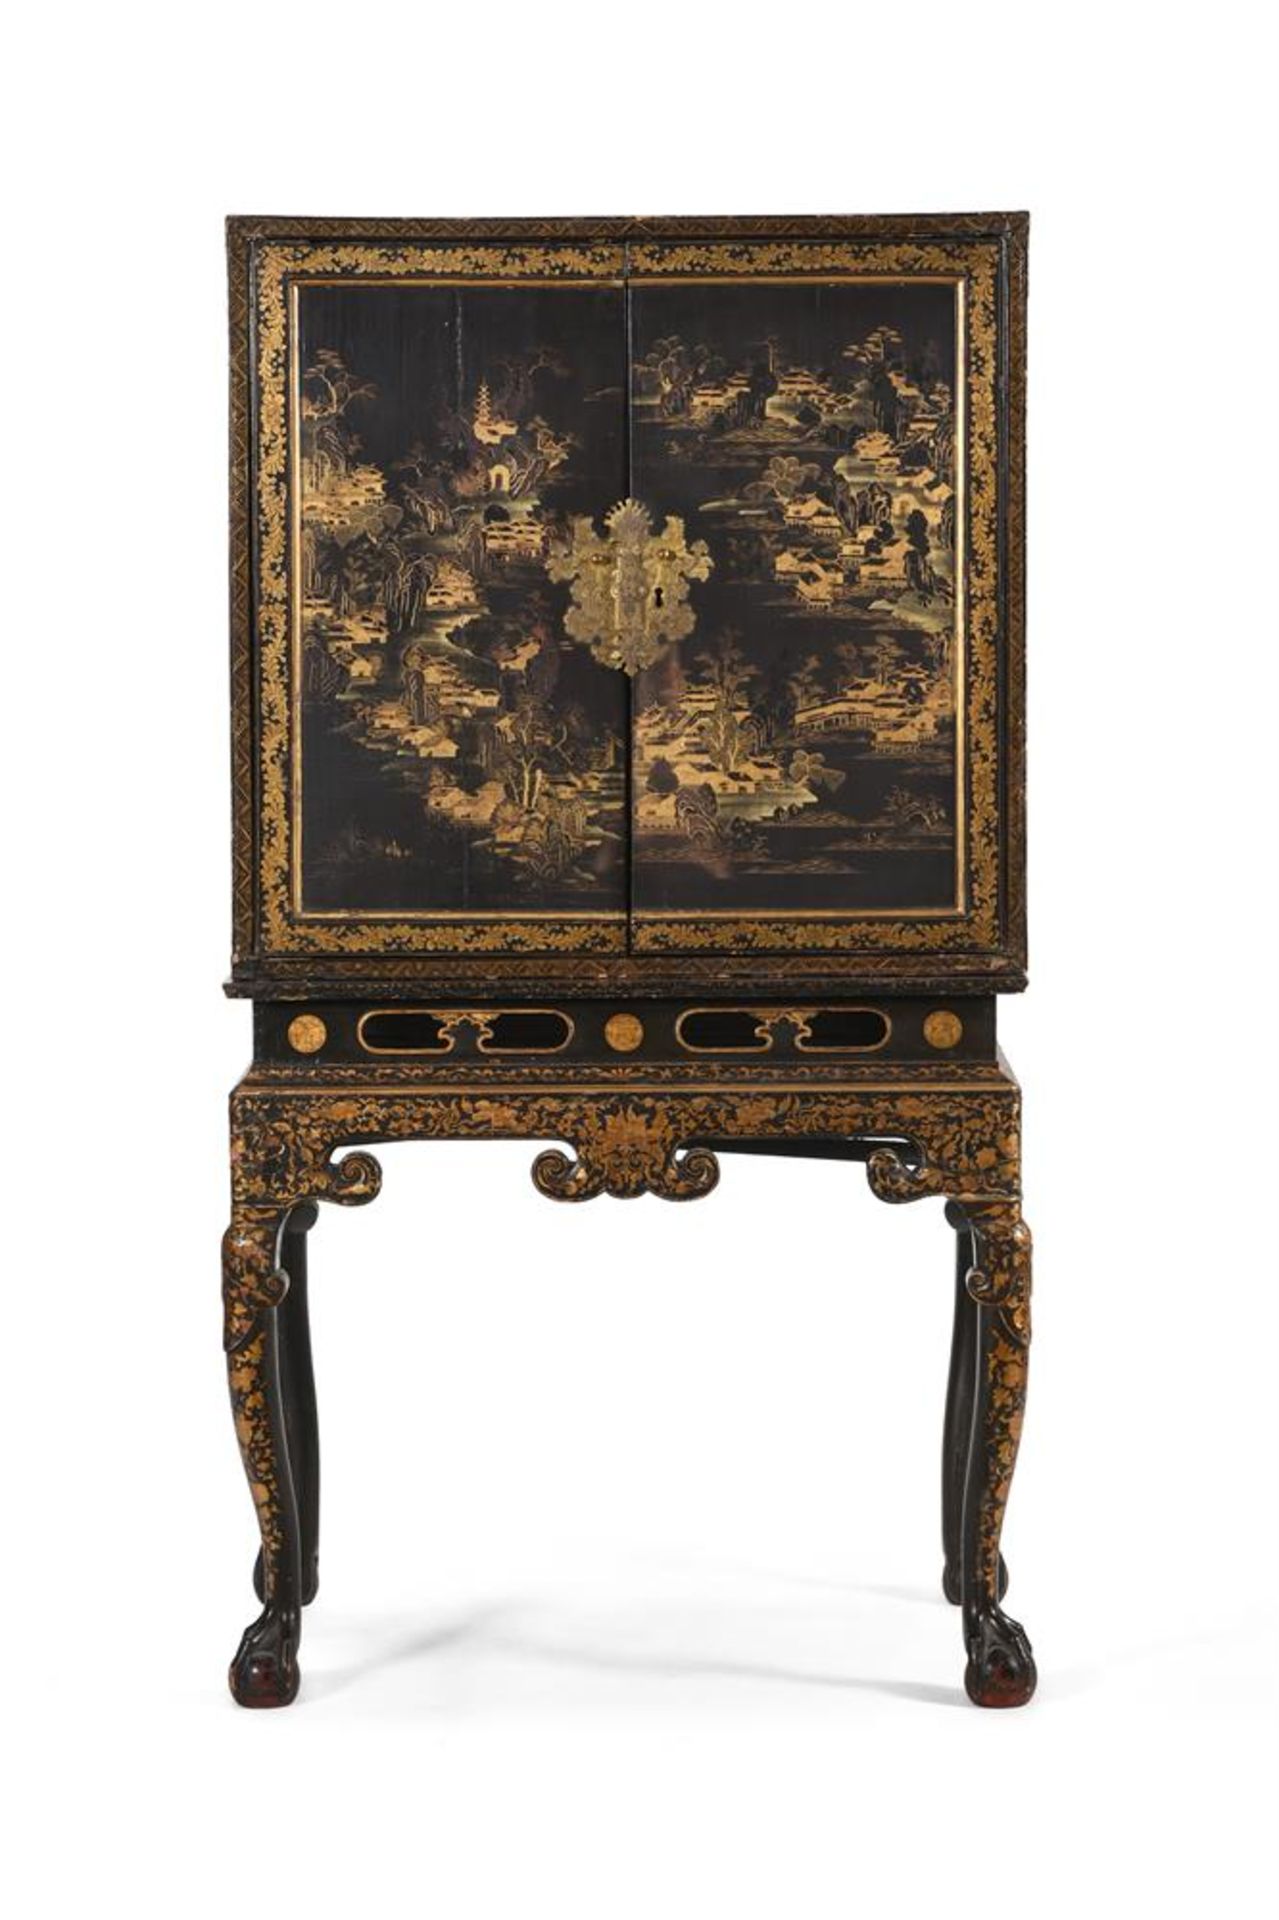 A CHINESE EXPORT LACQUER CABINET ON STAND, LATE 18TH OR EARLY 19TH CENTURY